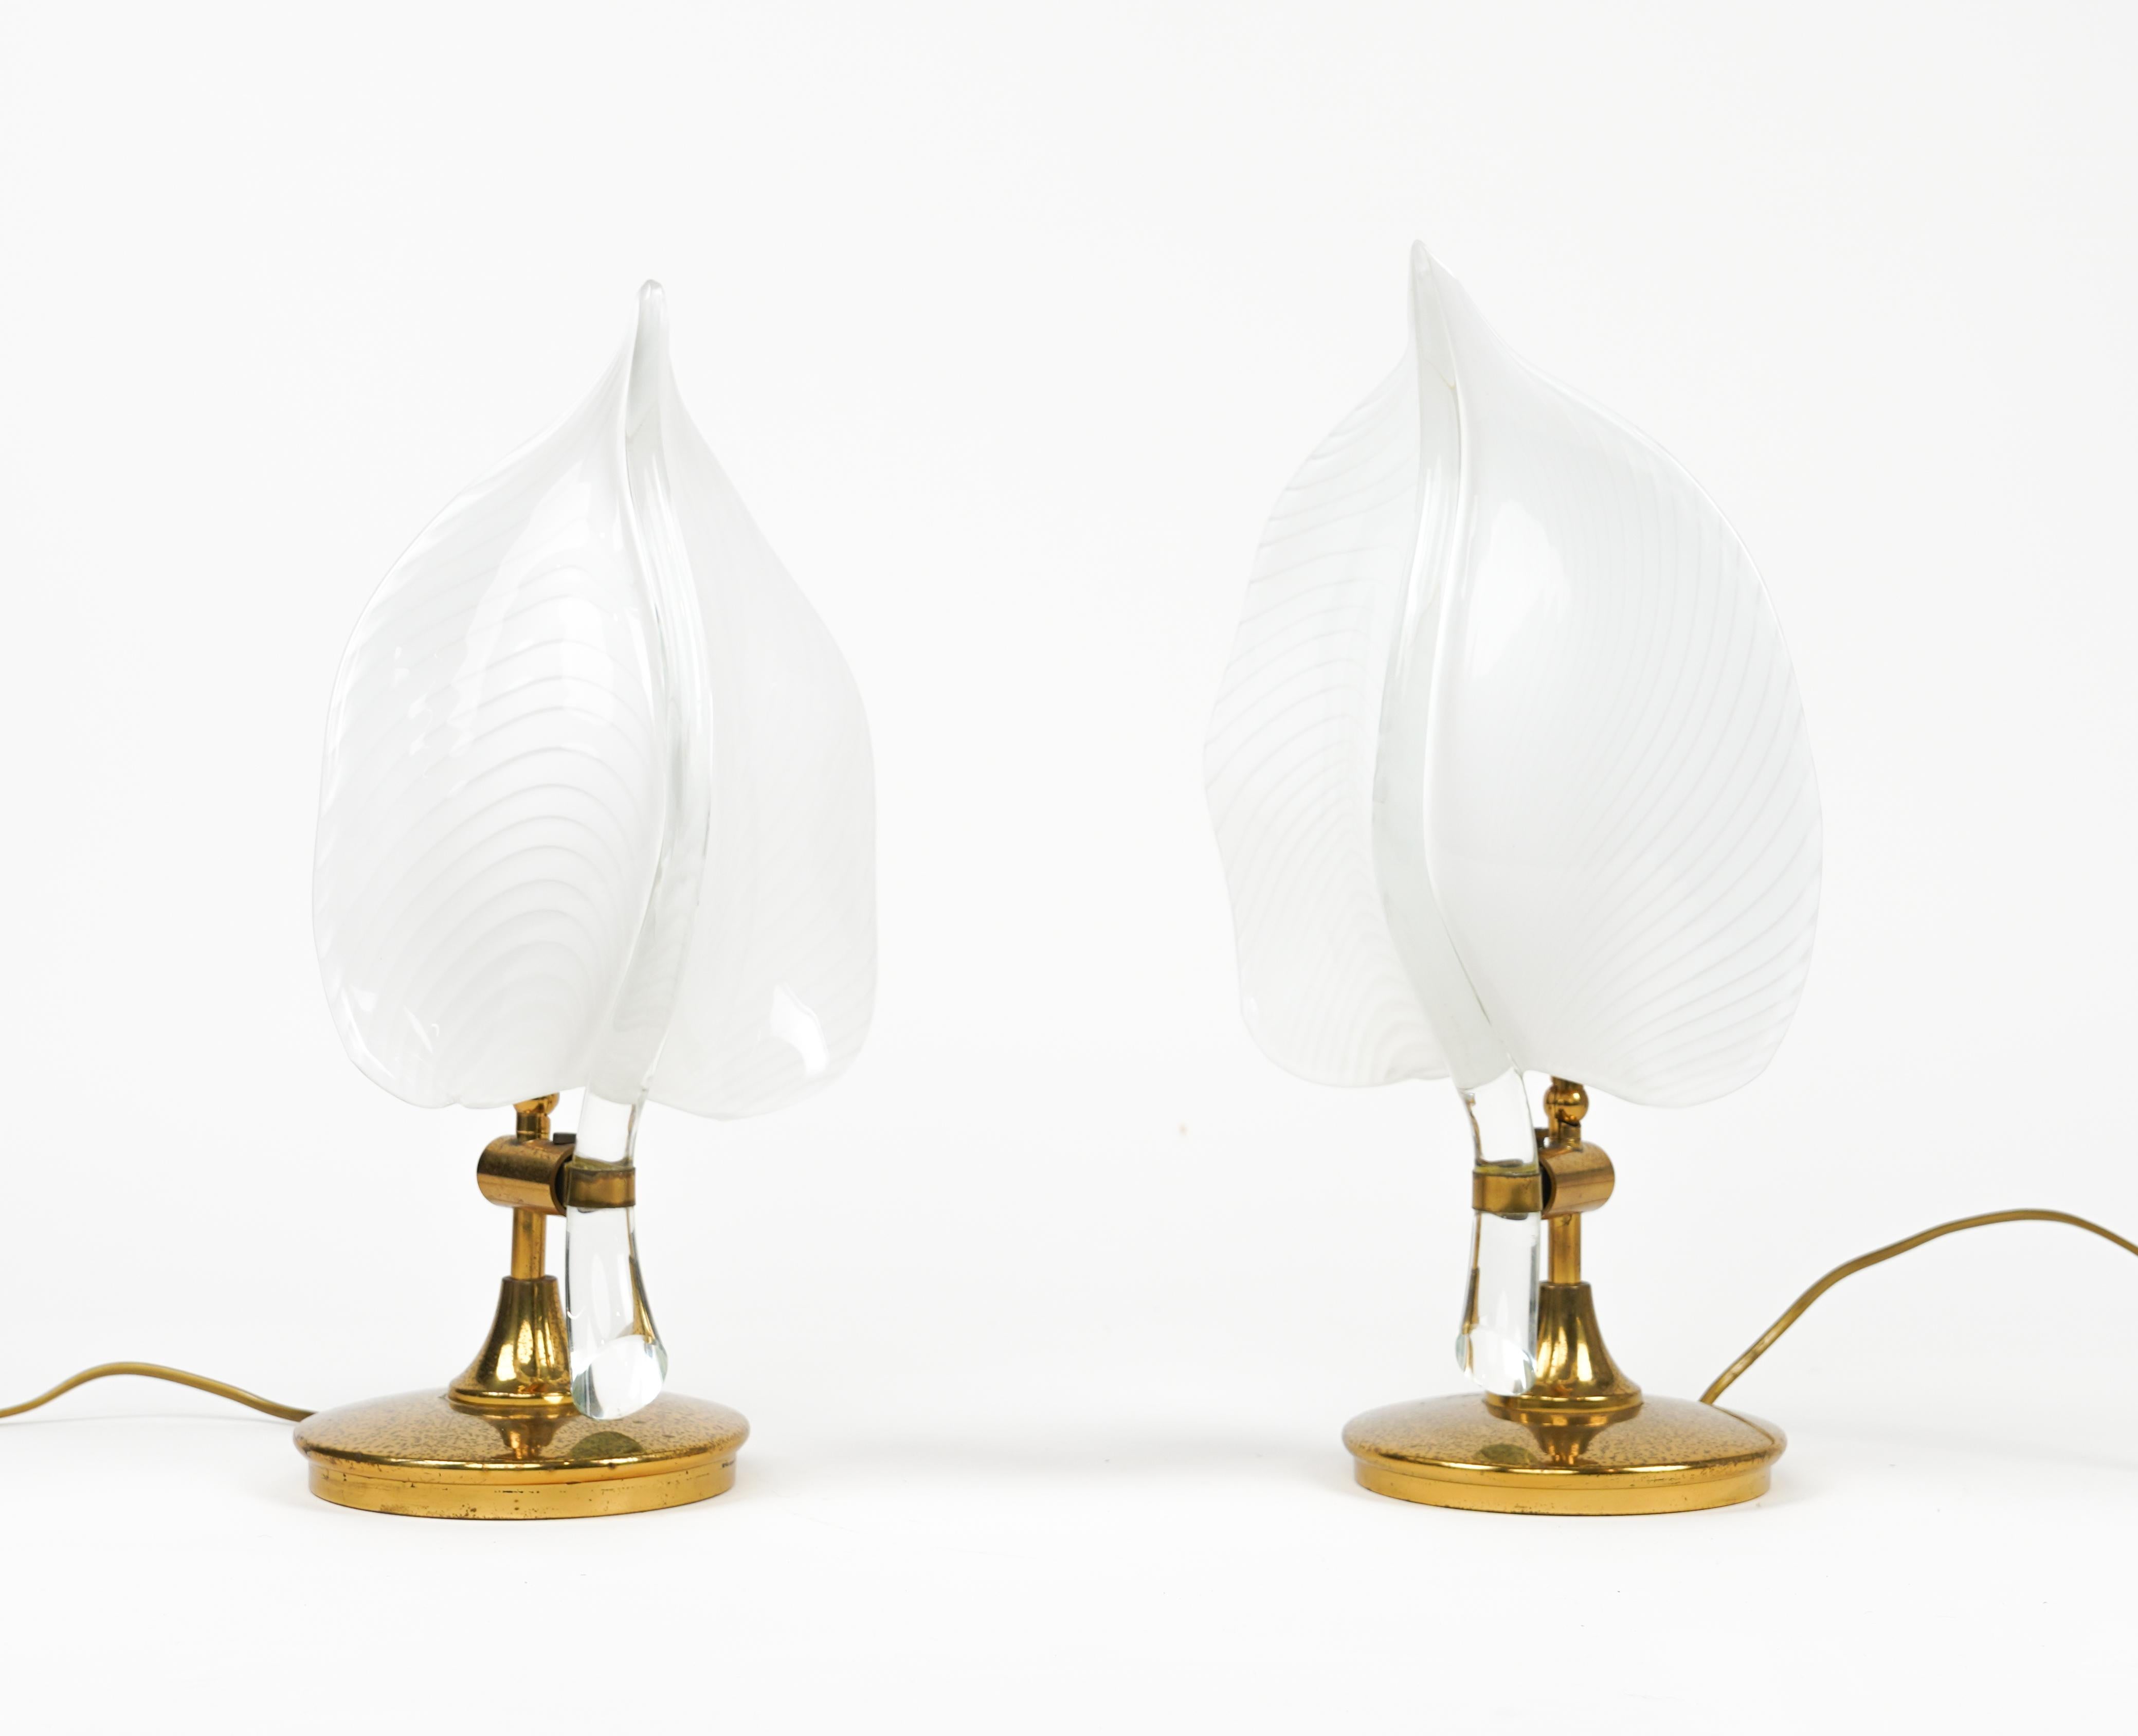 Midcentury beautiful pair of table lamps leaf shaped in murano glass and brass by Franco Luce.

Made in Italy in the 1970s.

European plug (works outside EU with a simple plug adapter).

